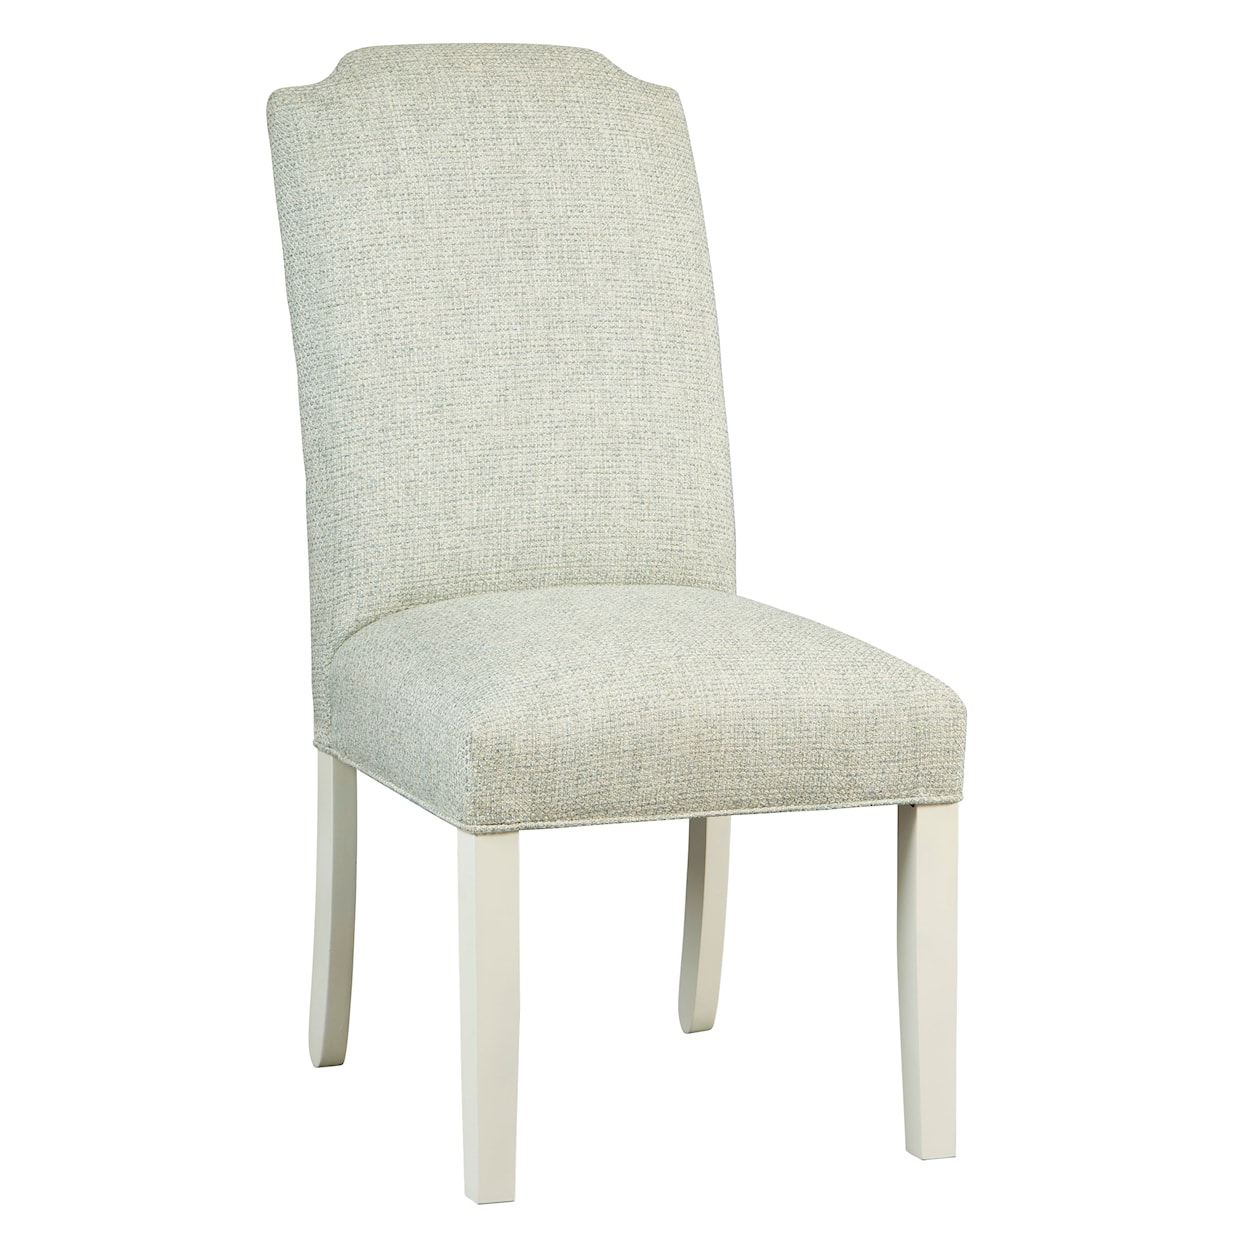 Hekman Upholstery Sherry Dining Chair